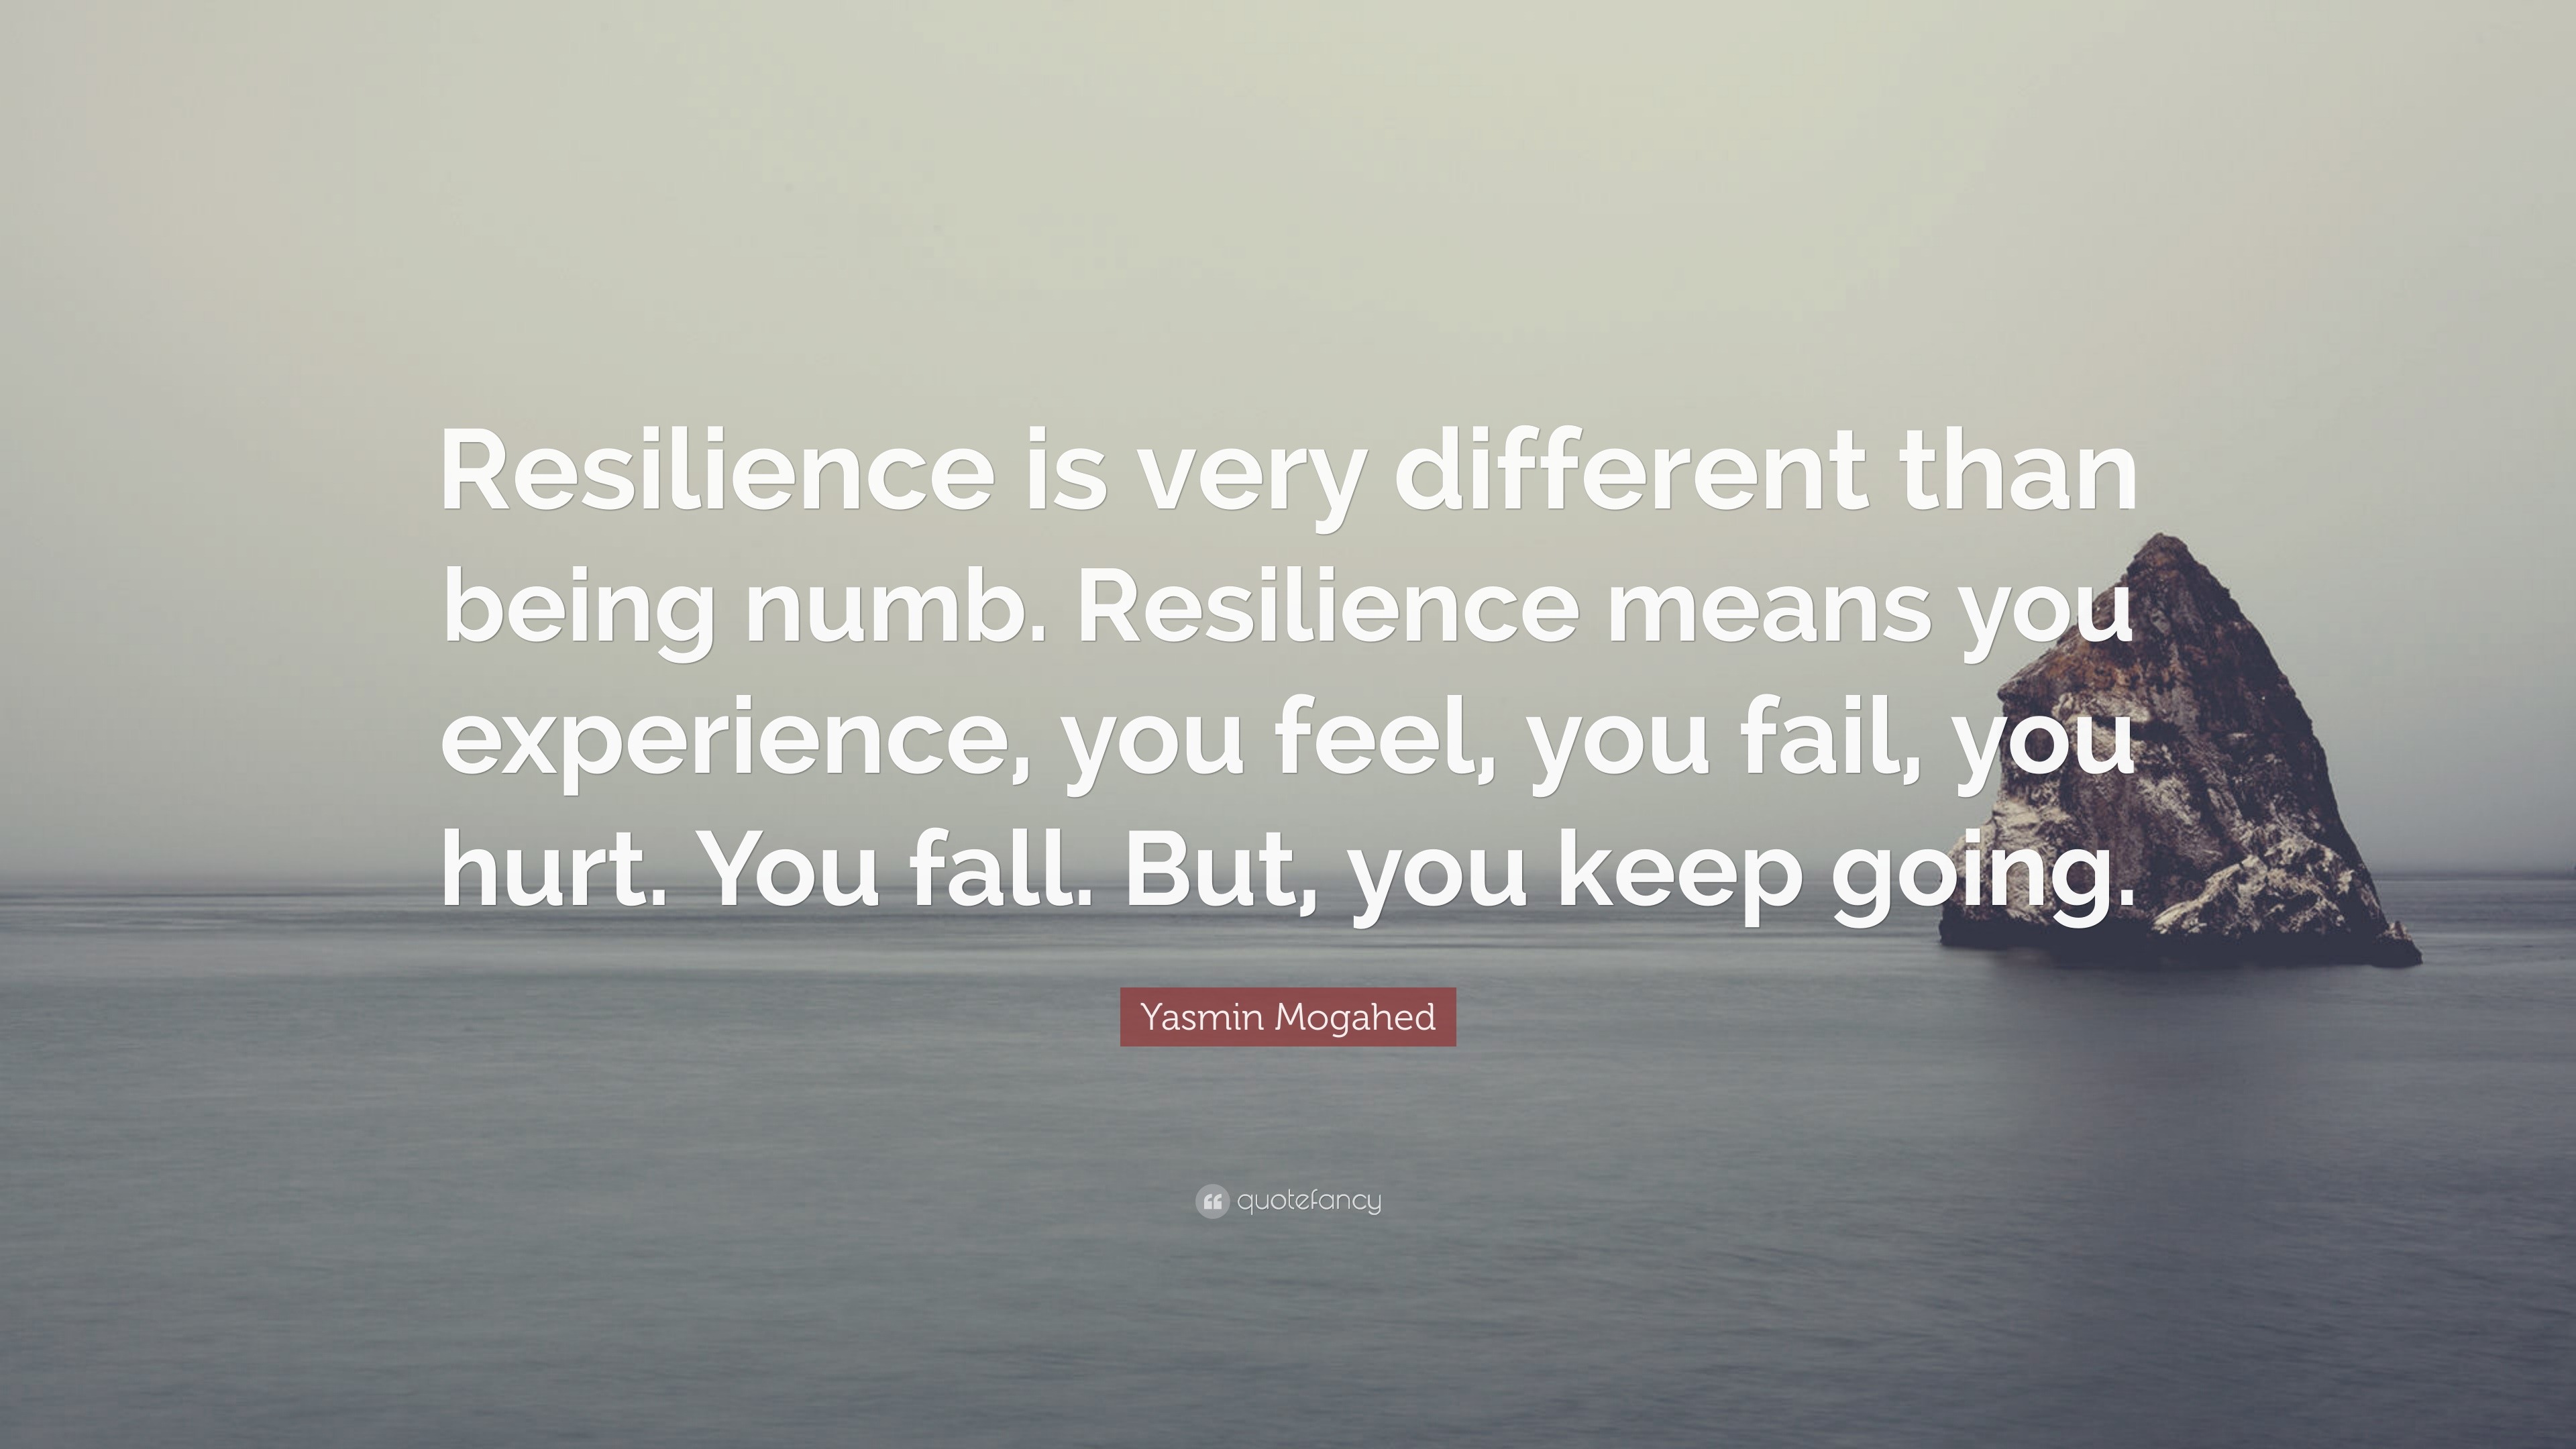 Yasmin Mogahed Quote: “Resilience is very different than being numb